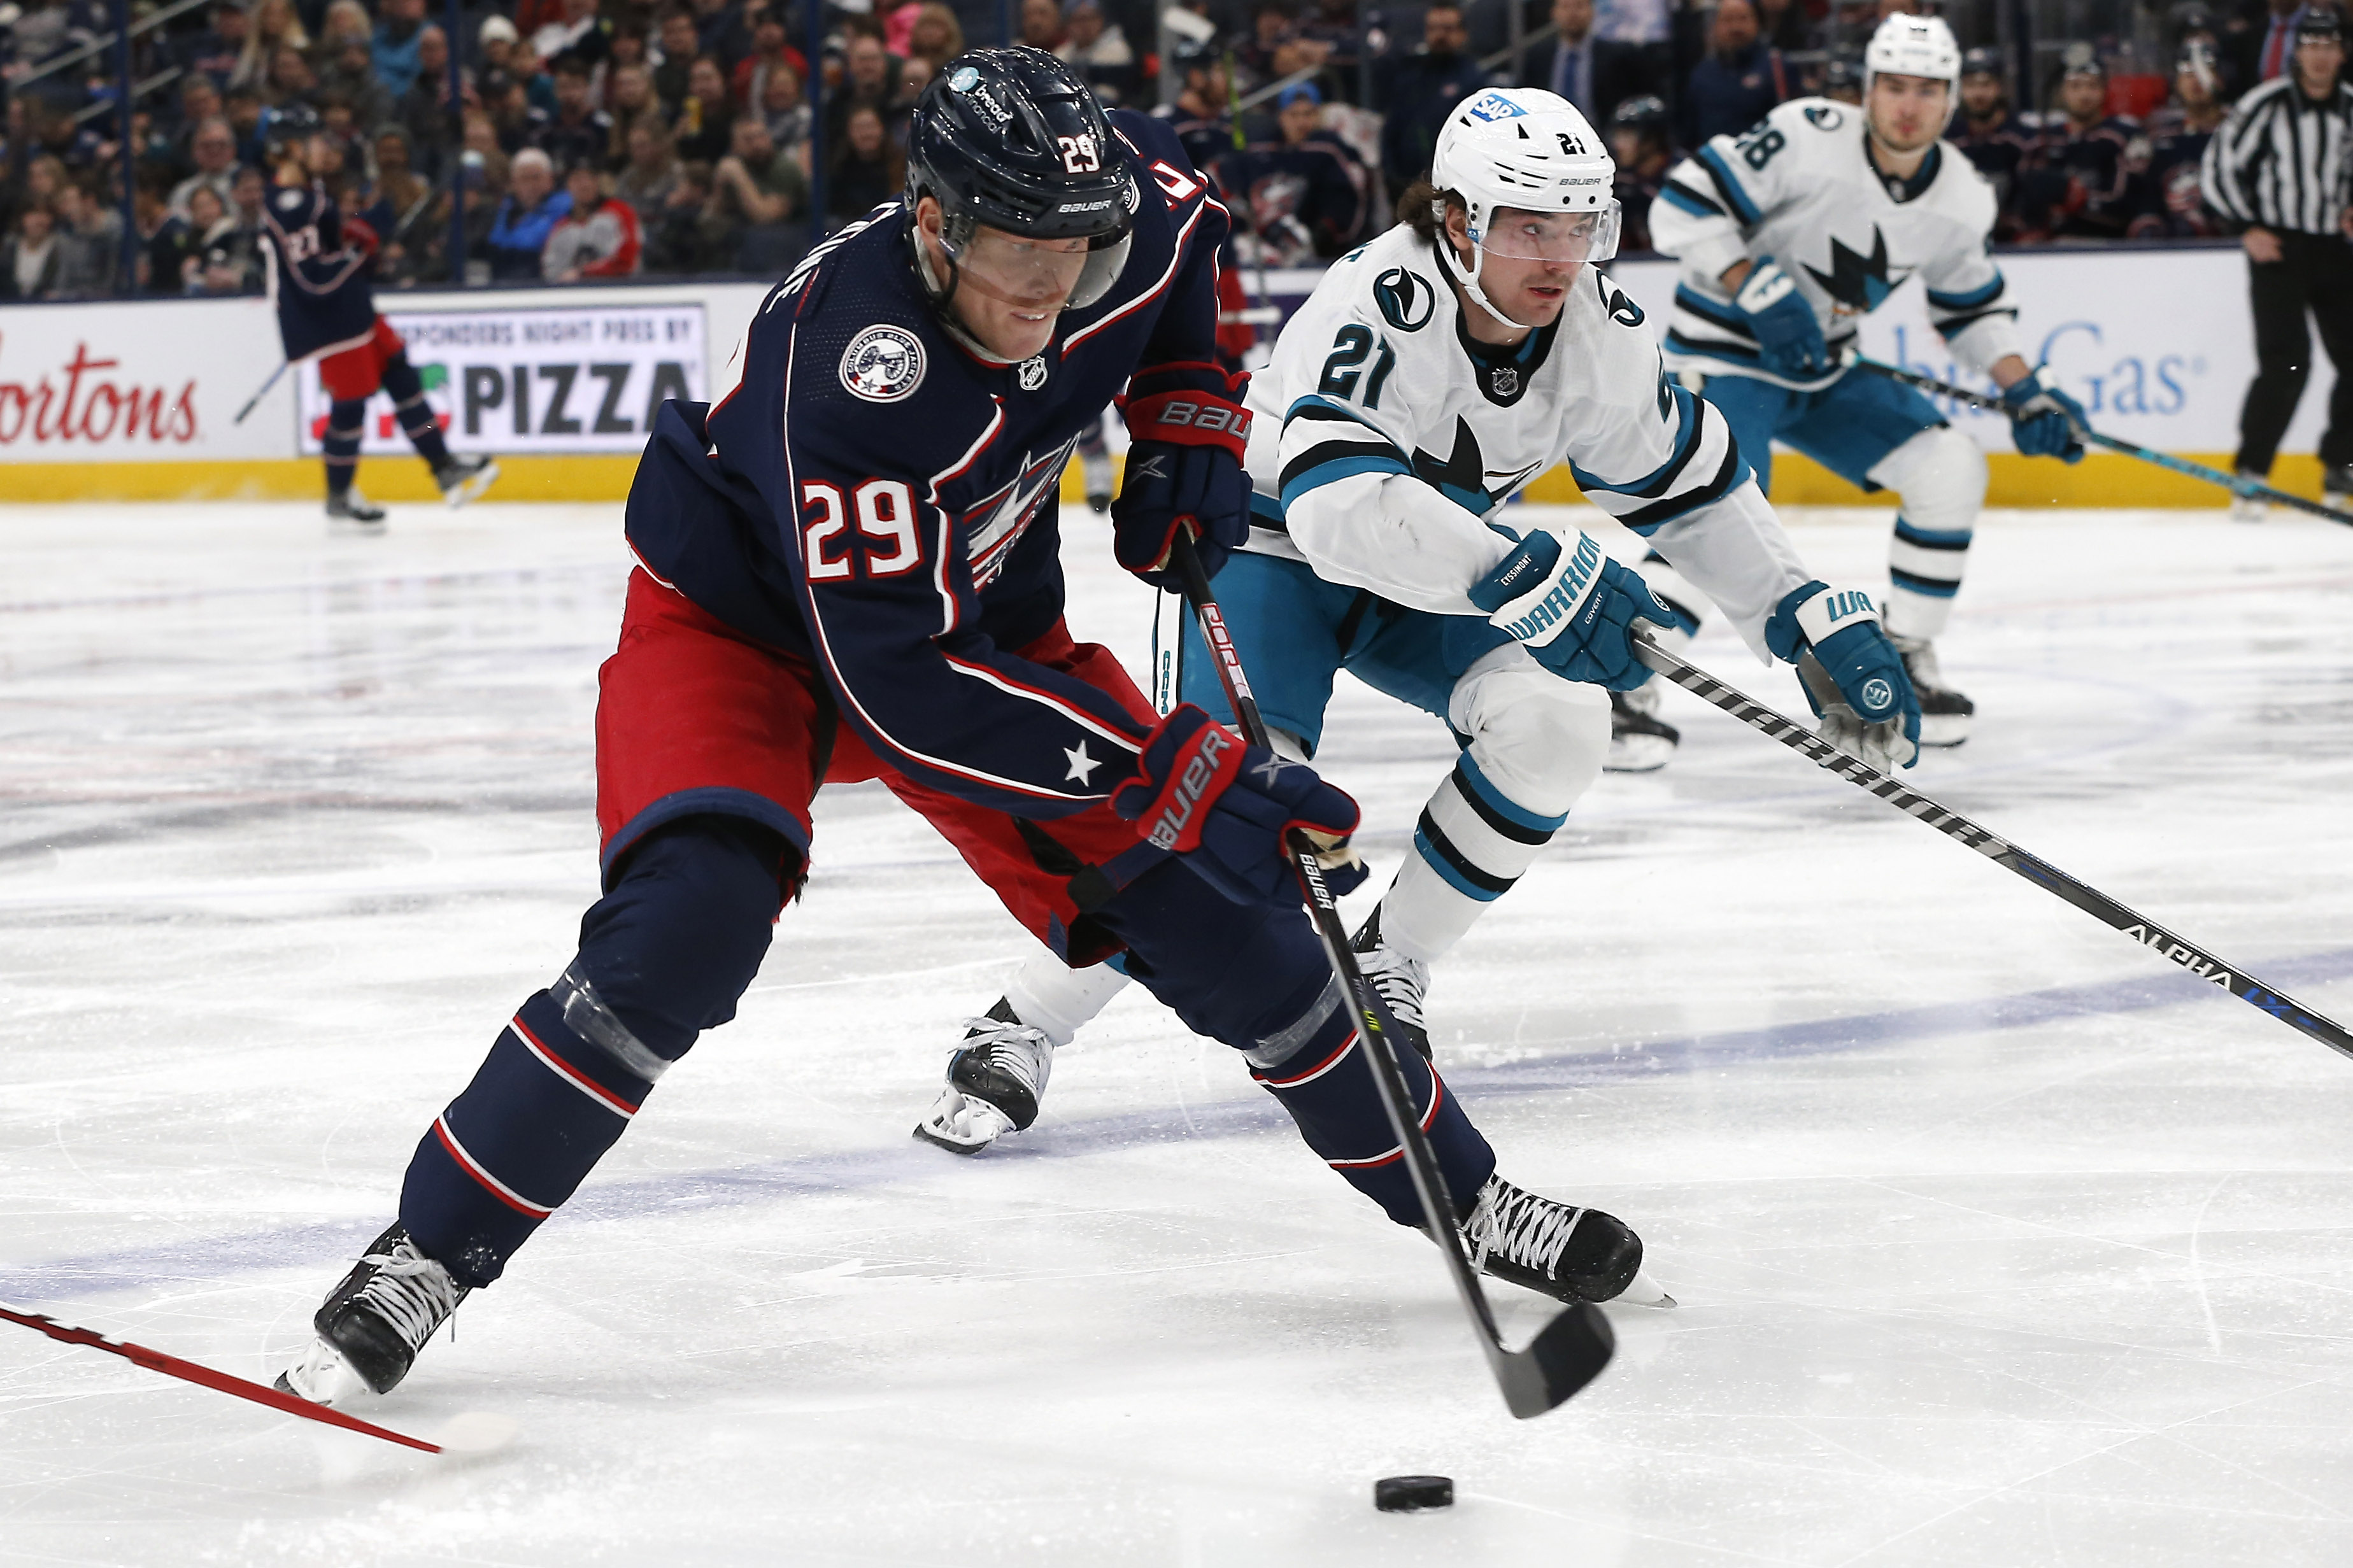 Jan 21, 2023; Columbus, Ohio, USA; Columbus Blue Jackets right wing Patrik Laine (29) carries the puck as San Jose Sharks center Mikey Eyssimont (21) trails the play during the first period at Nationwide Arena.